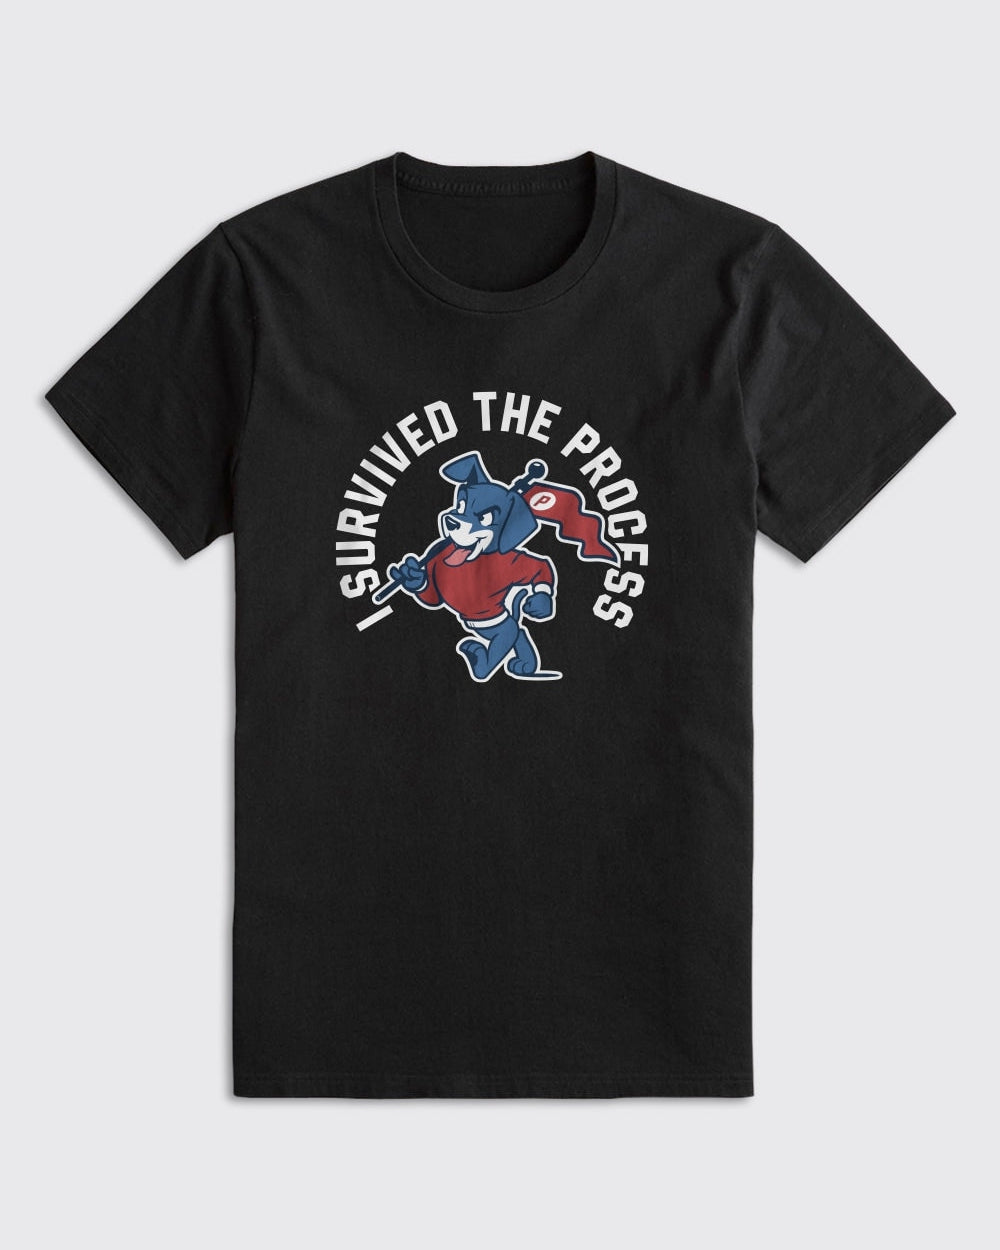 I Survived The Process Shirt-Philly Sports Shirts